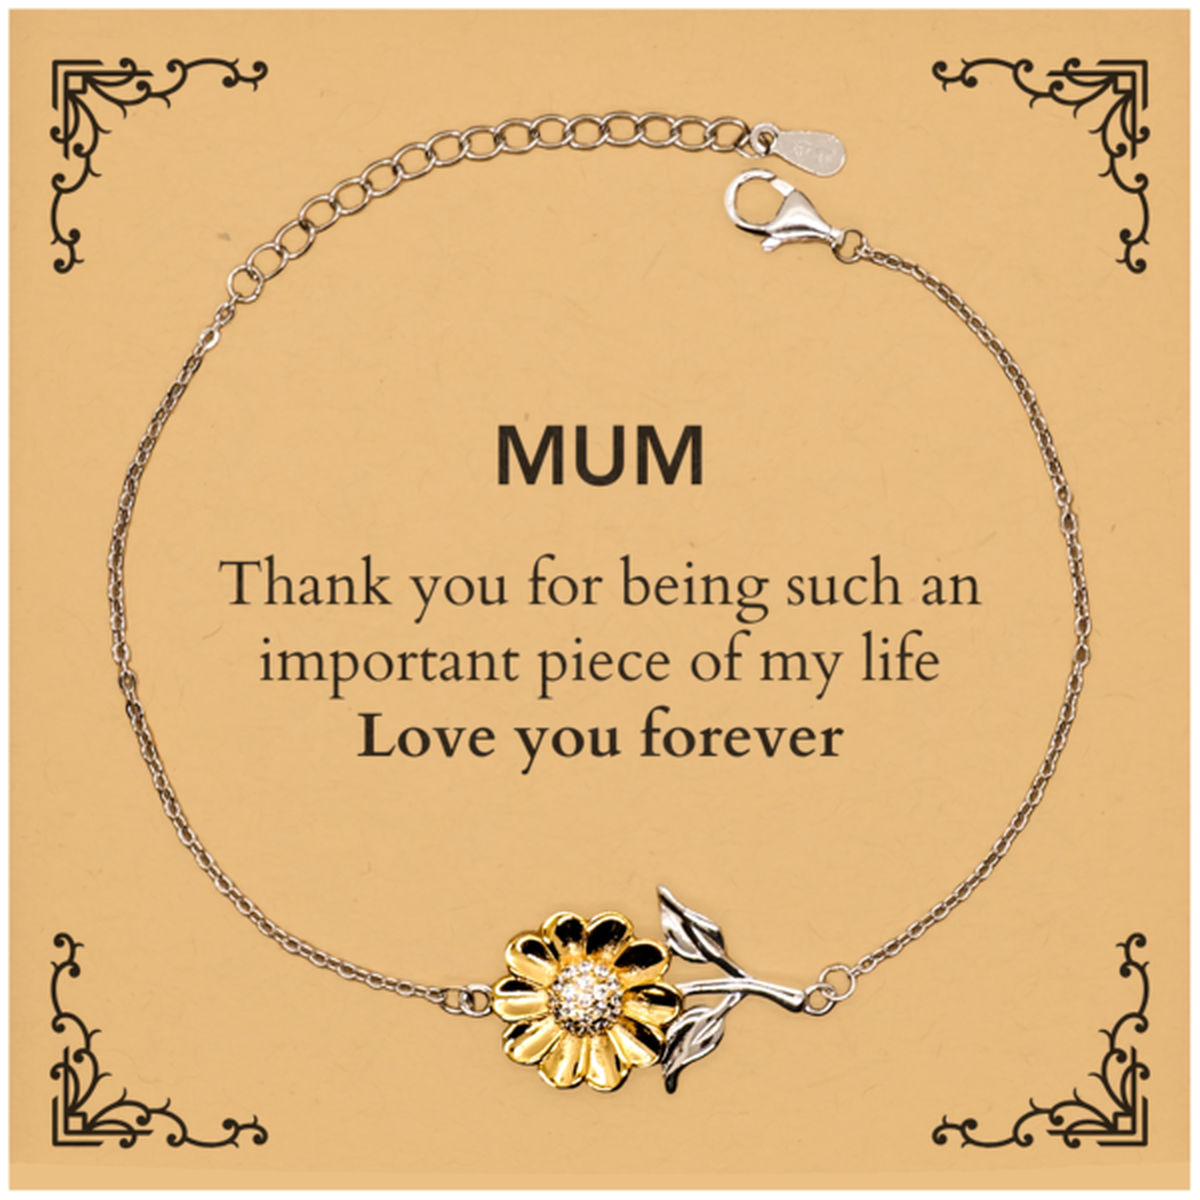 Appropriate Mum Sunflower Bracelet Epic Birthday Gifts for Mum Thank you for being such an important piece of my life Mum Christmas Mothers Fathers Day